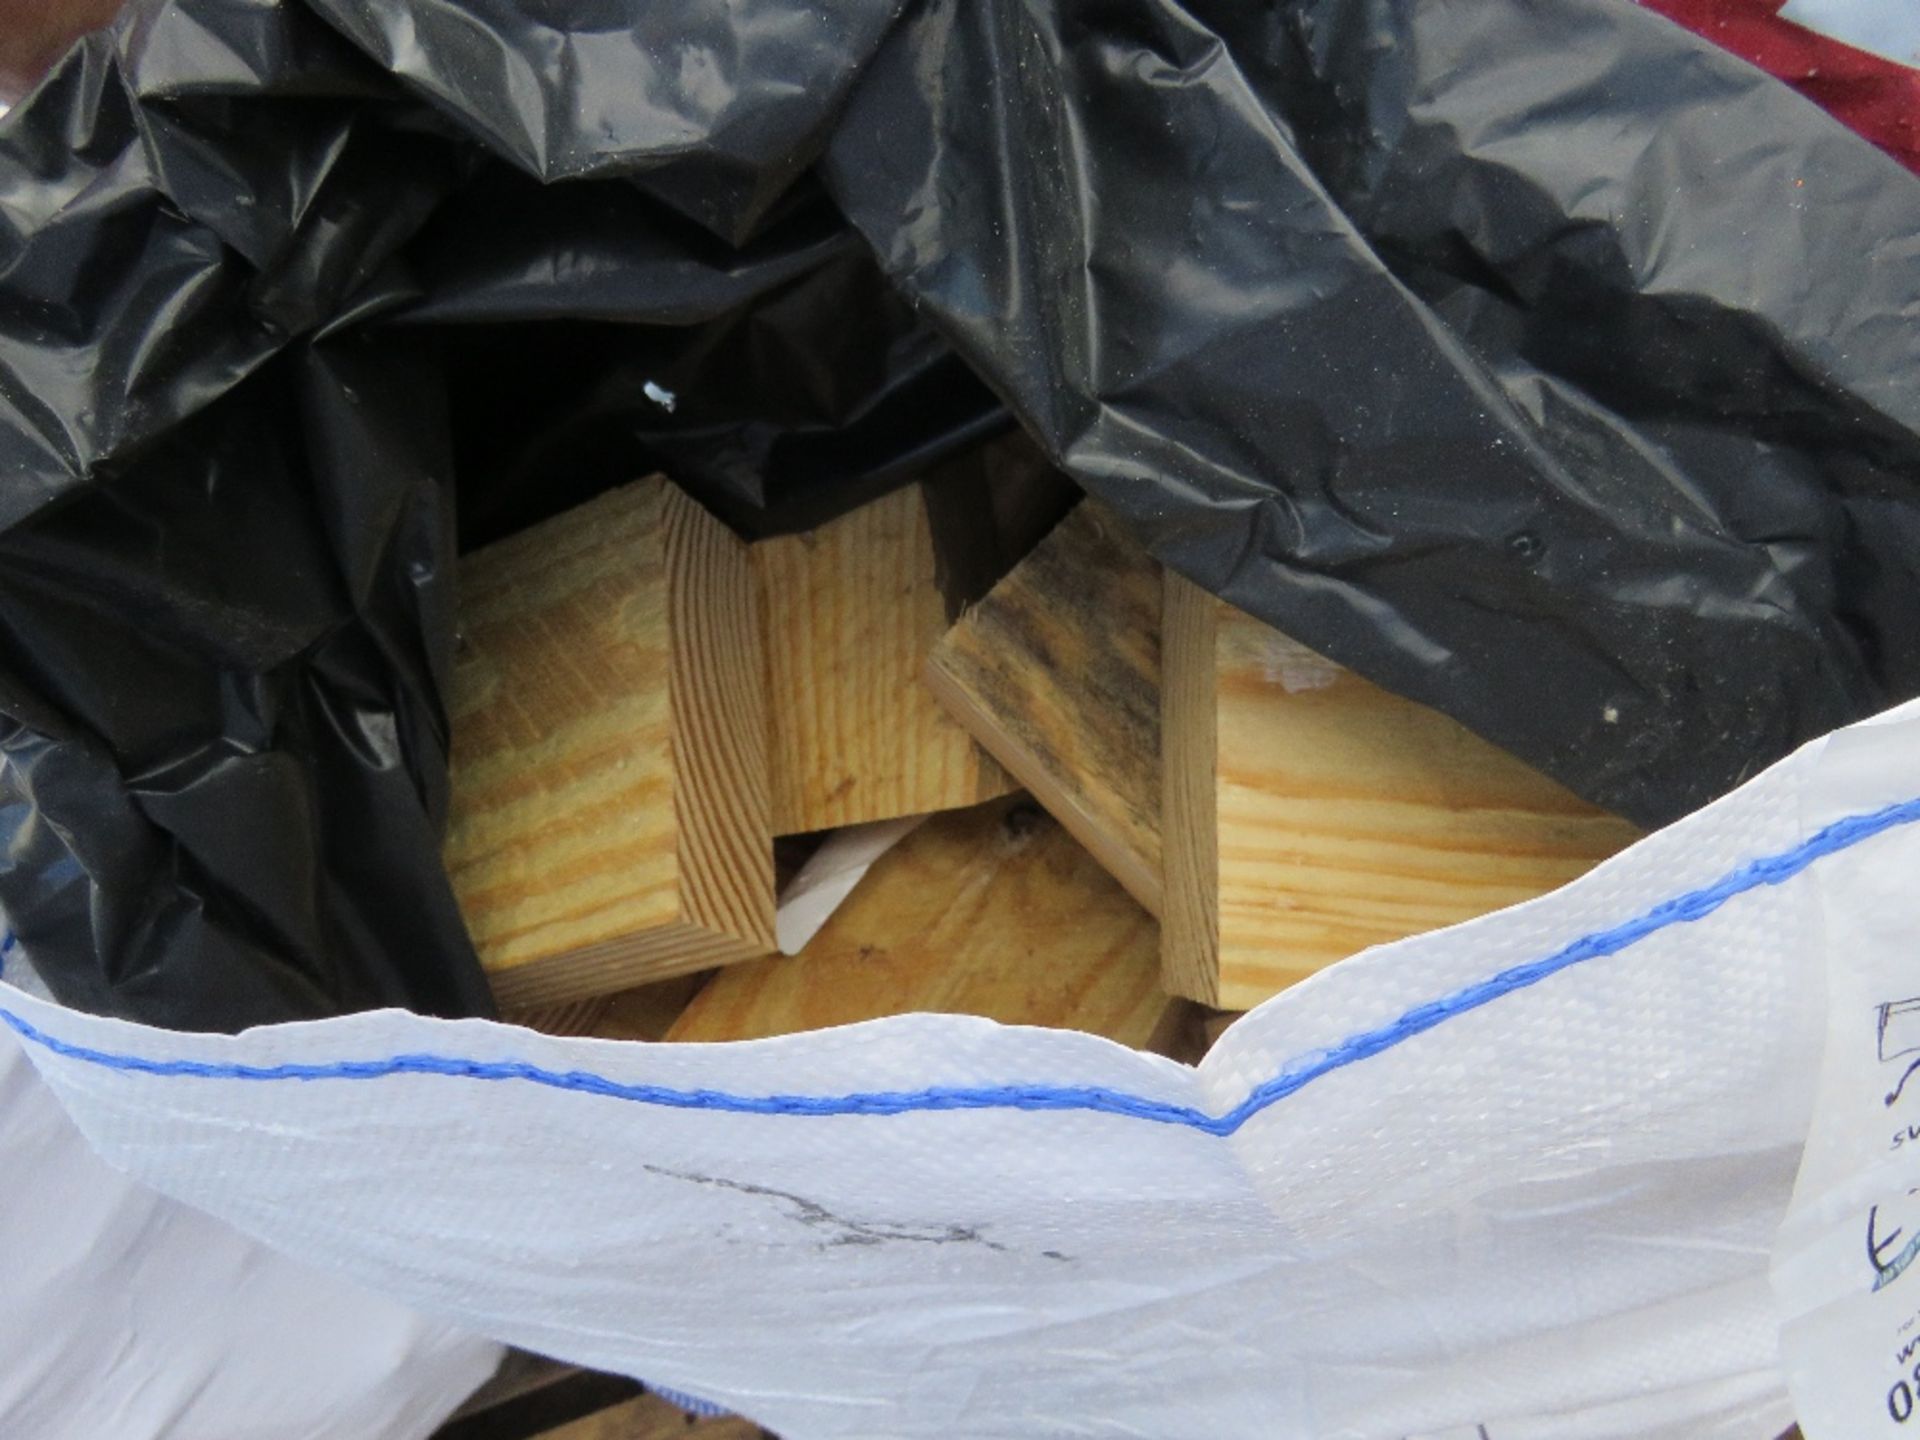 2 X BAGS OF FIREWOOD OFFCUT TIMBER. - Image 3 of 3